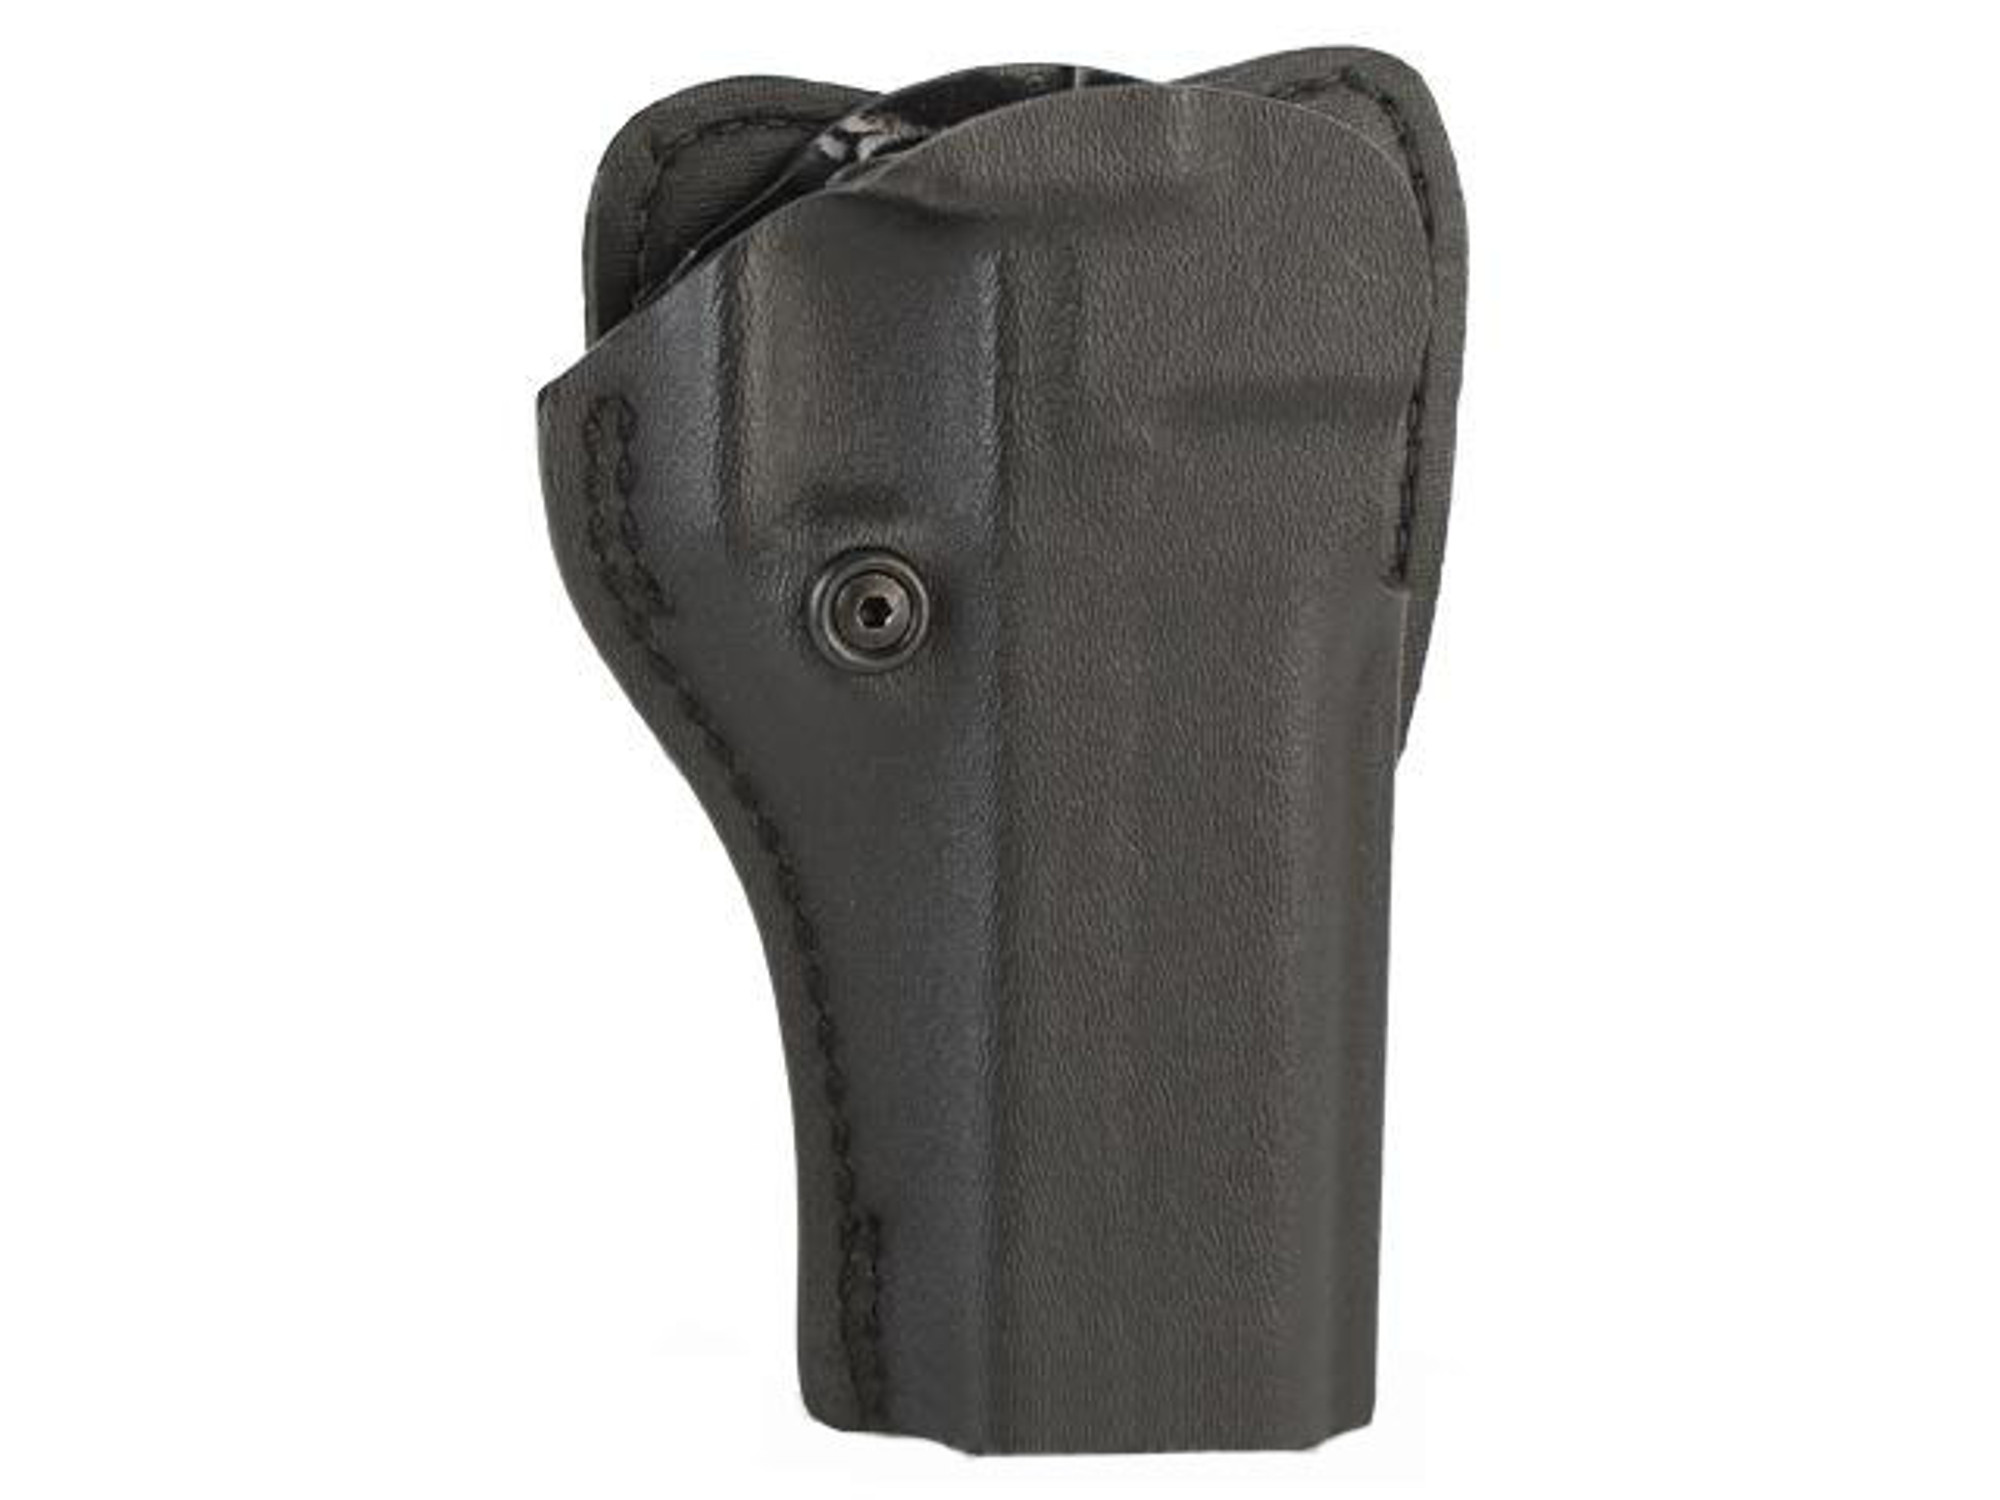 SAFARILAND Open Top Concealment Belt Loop Holster with Detent - STI 2011 5" w/ Full Dust Cover (Right)